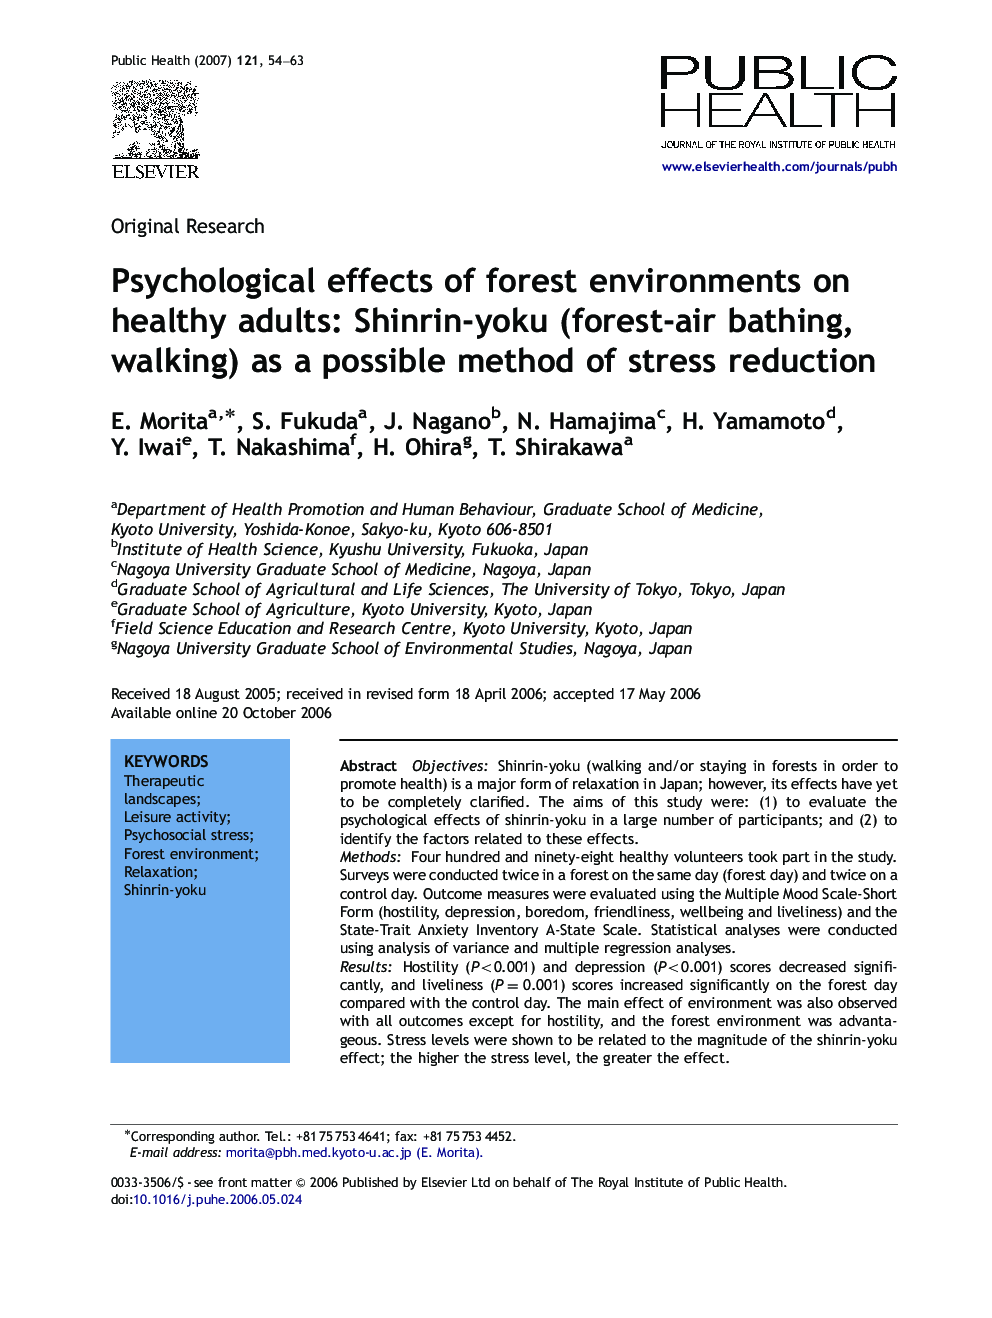 Psychological effects of forest environments on healthy adults: Shinrin-yoku (forest-air bathing, walking) as a possible method of stress reduction